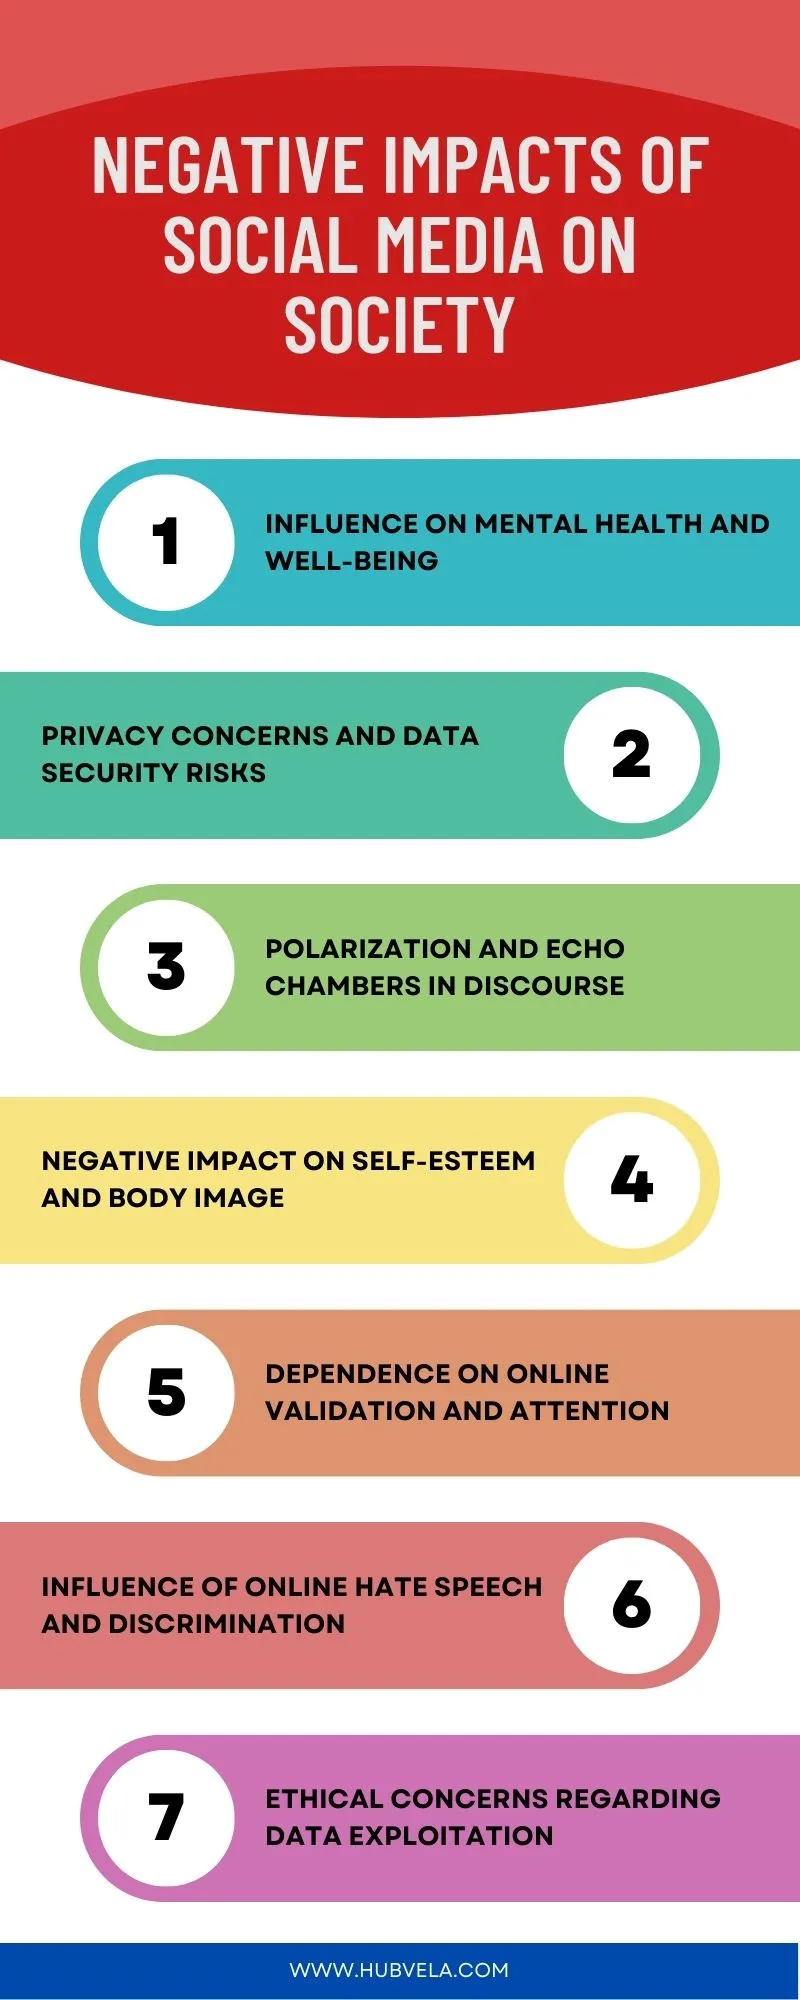 Negative Impacts of Social Media on Society Infographic